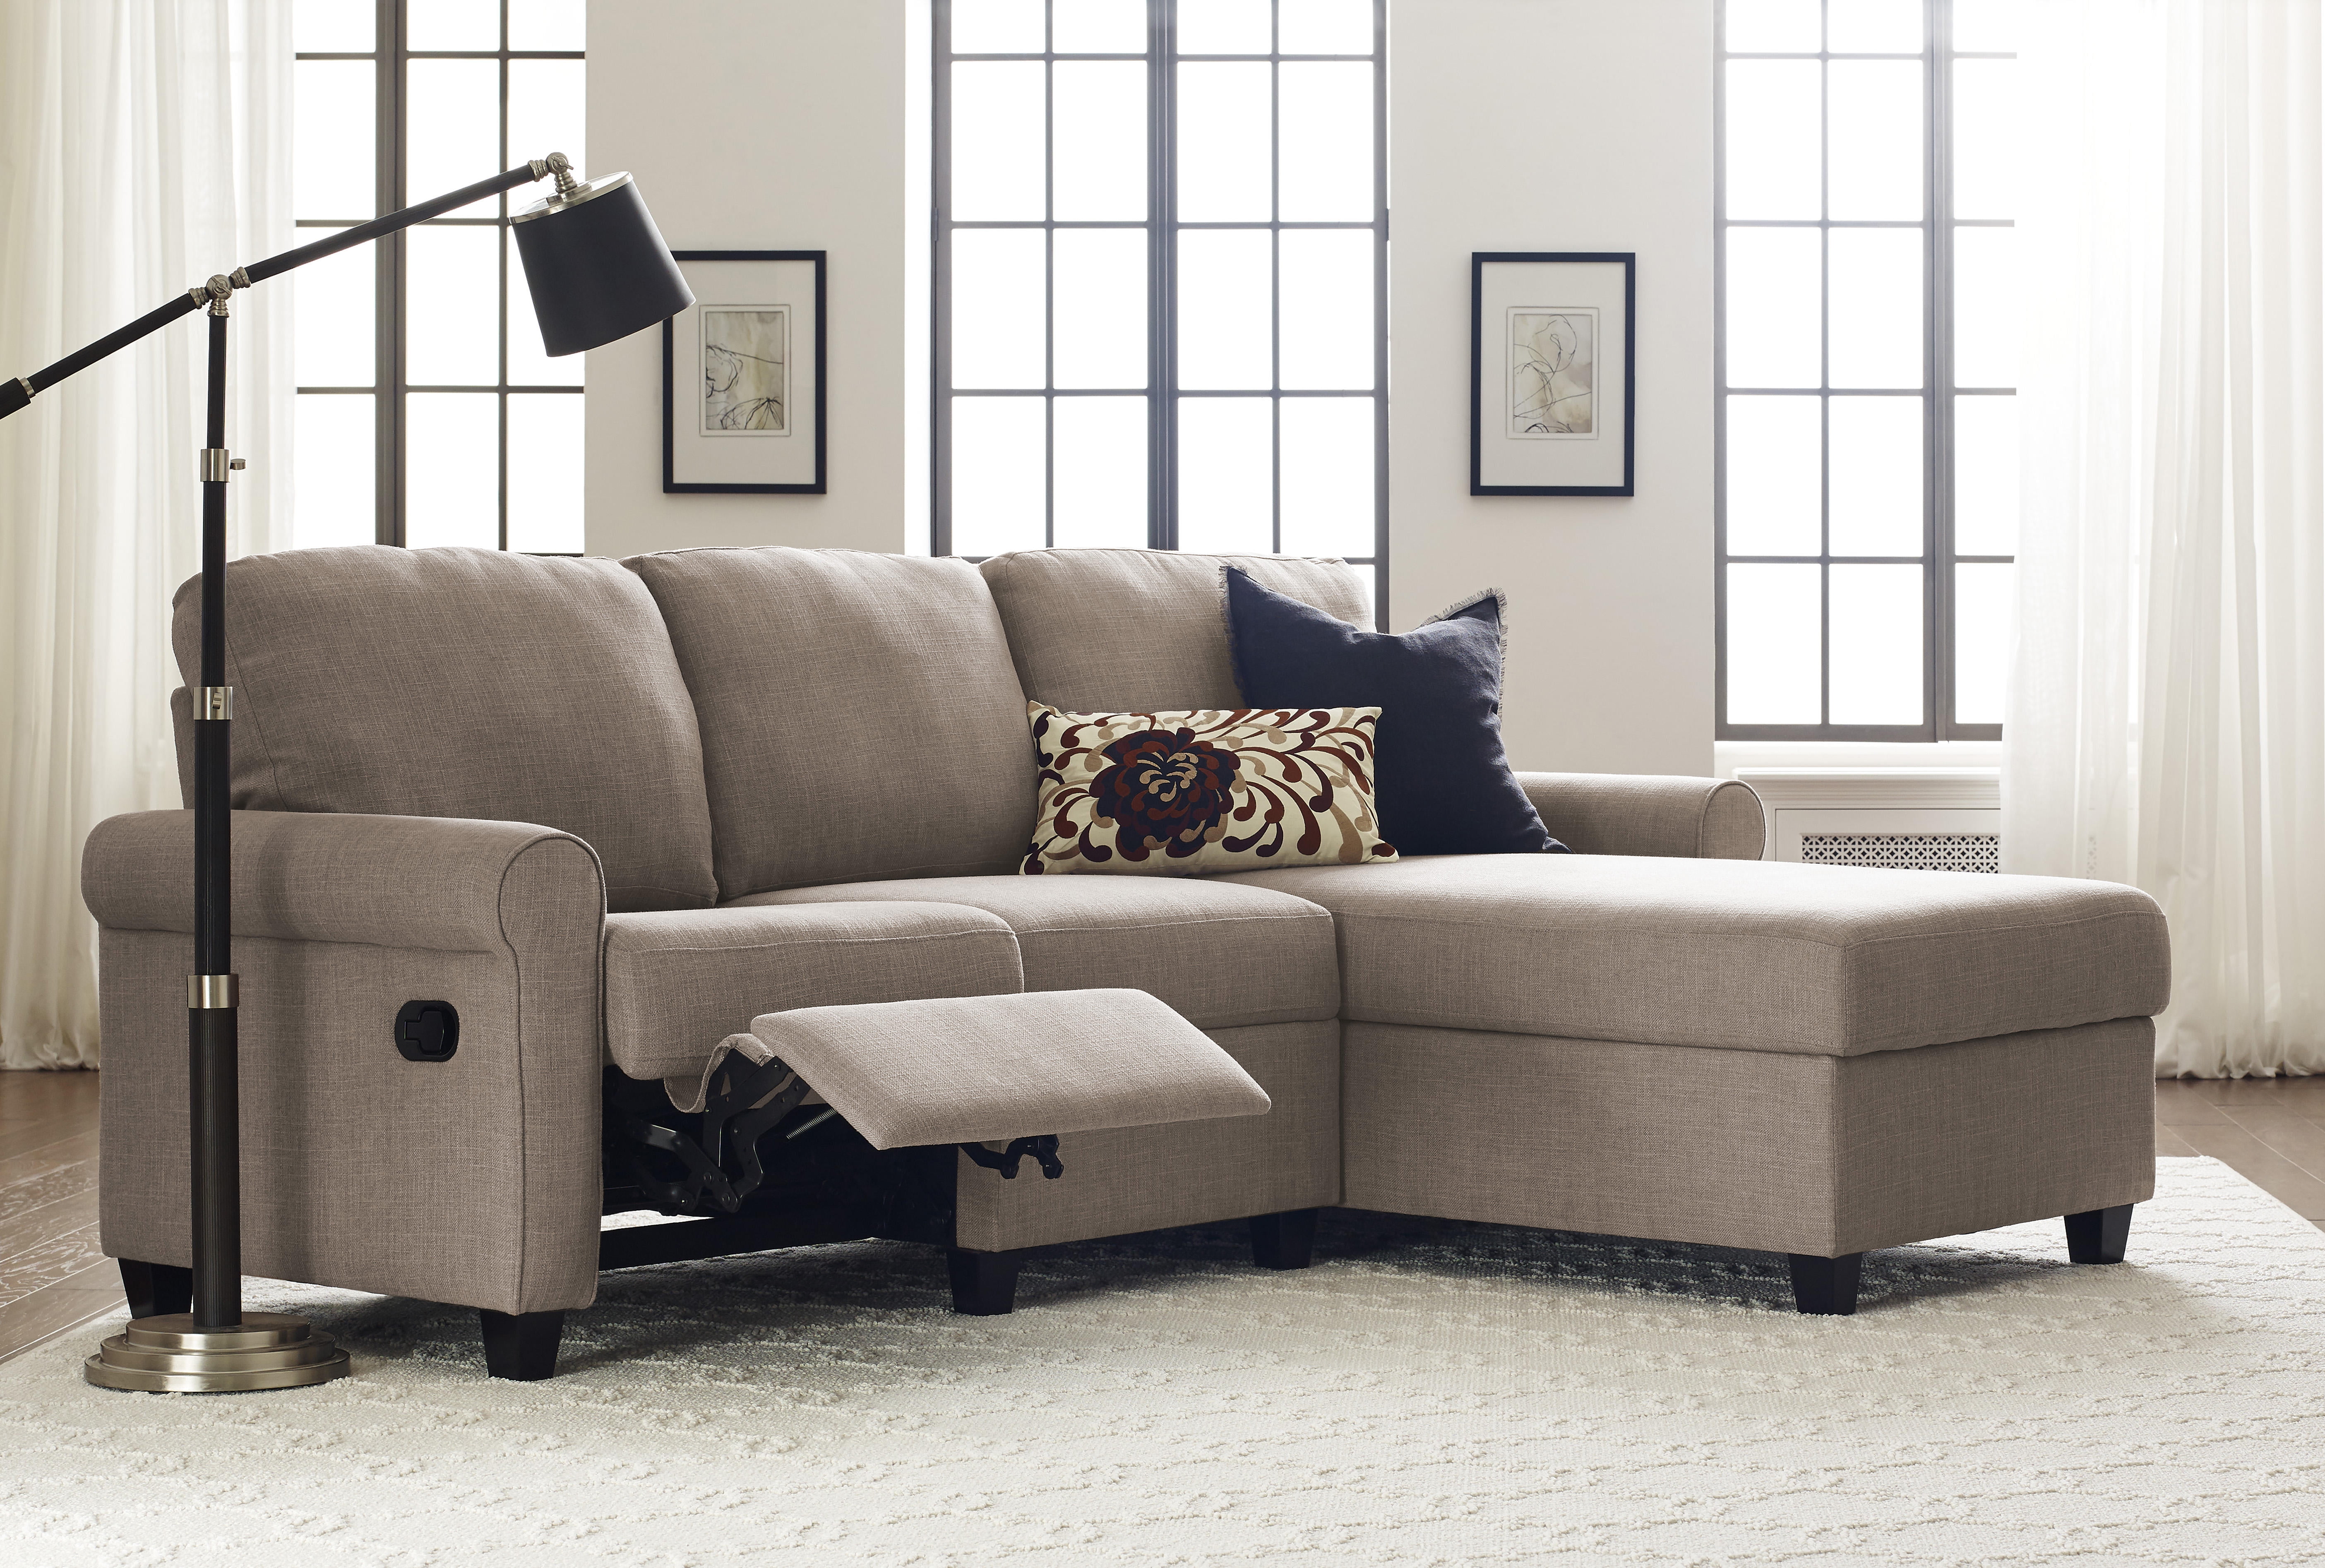 Serta Copenhagen Reclining Sectional, Grey Fabric Sectional Sofas With Recliner And Chaise